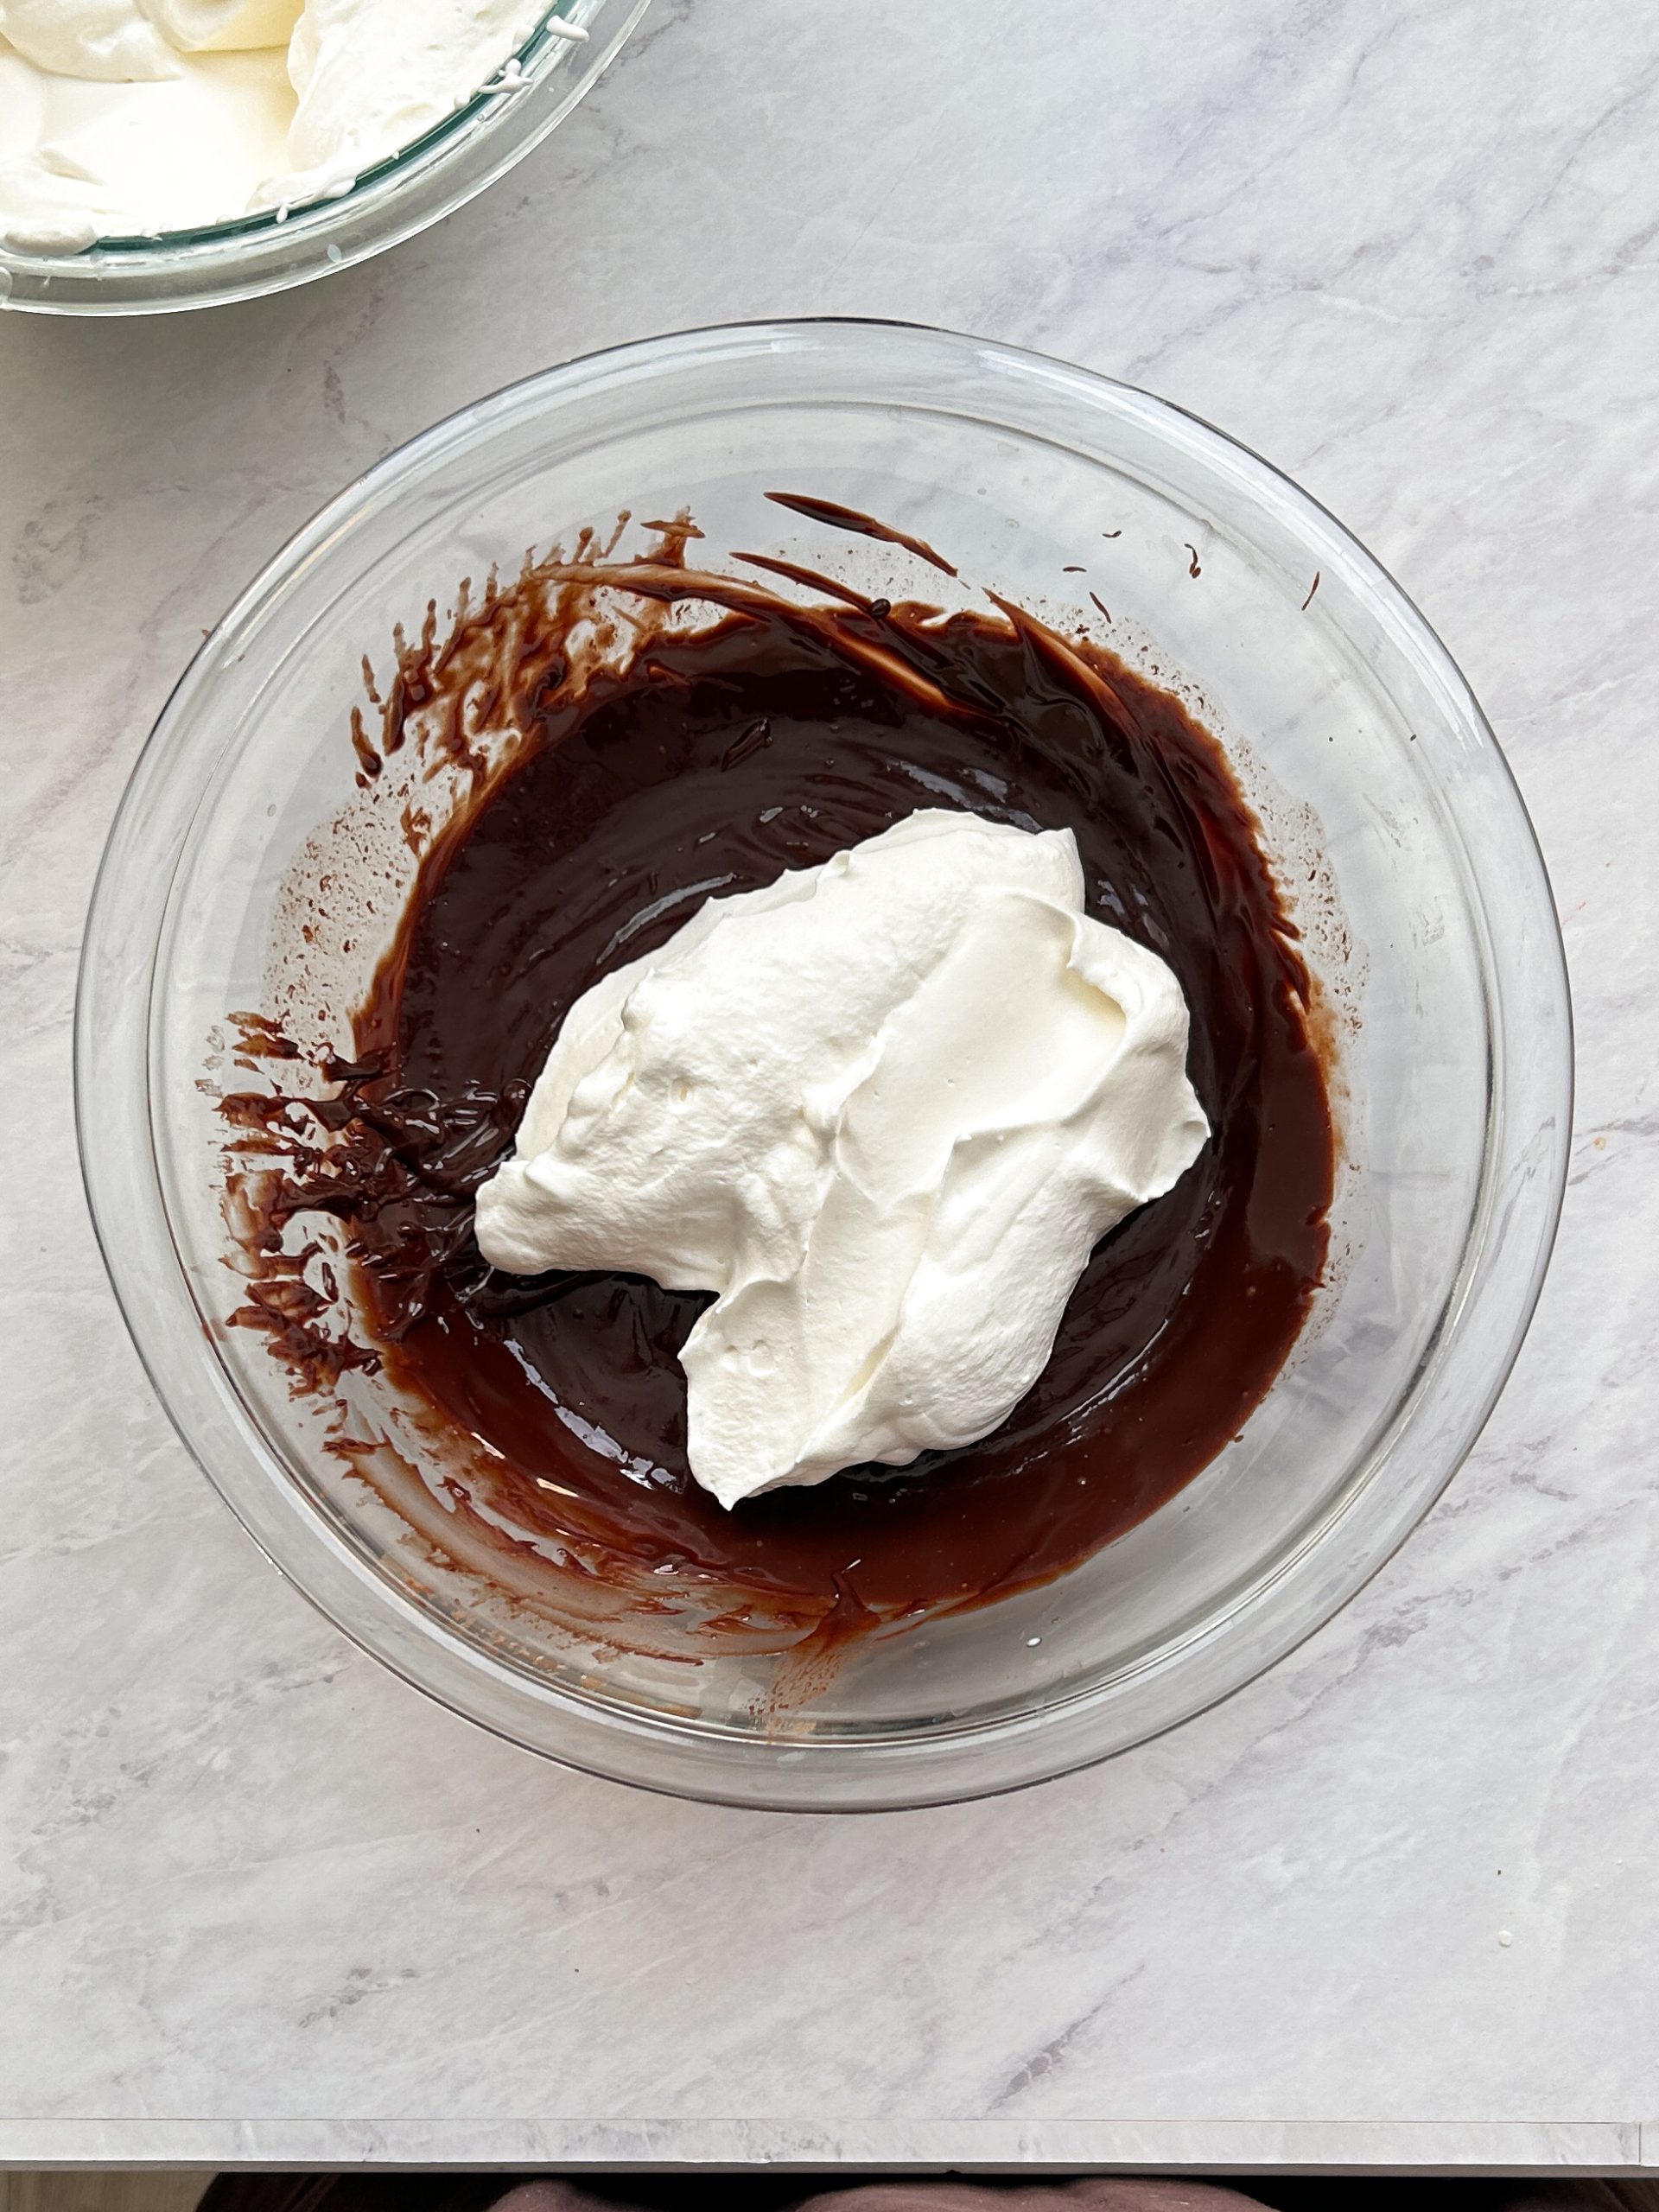 whipped cream added to chocolate ganache in a glass bowl